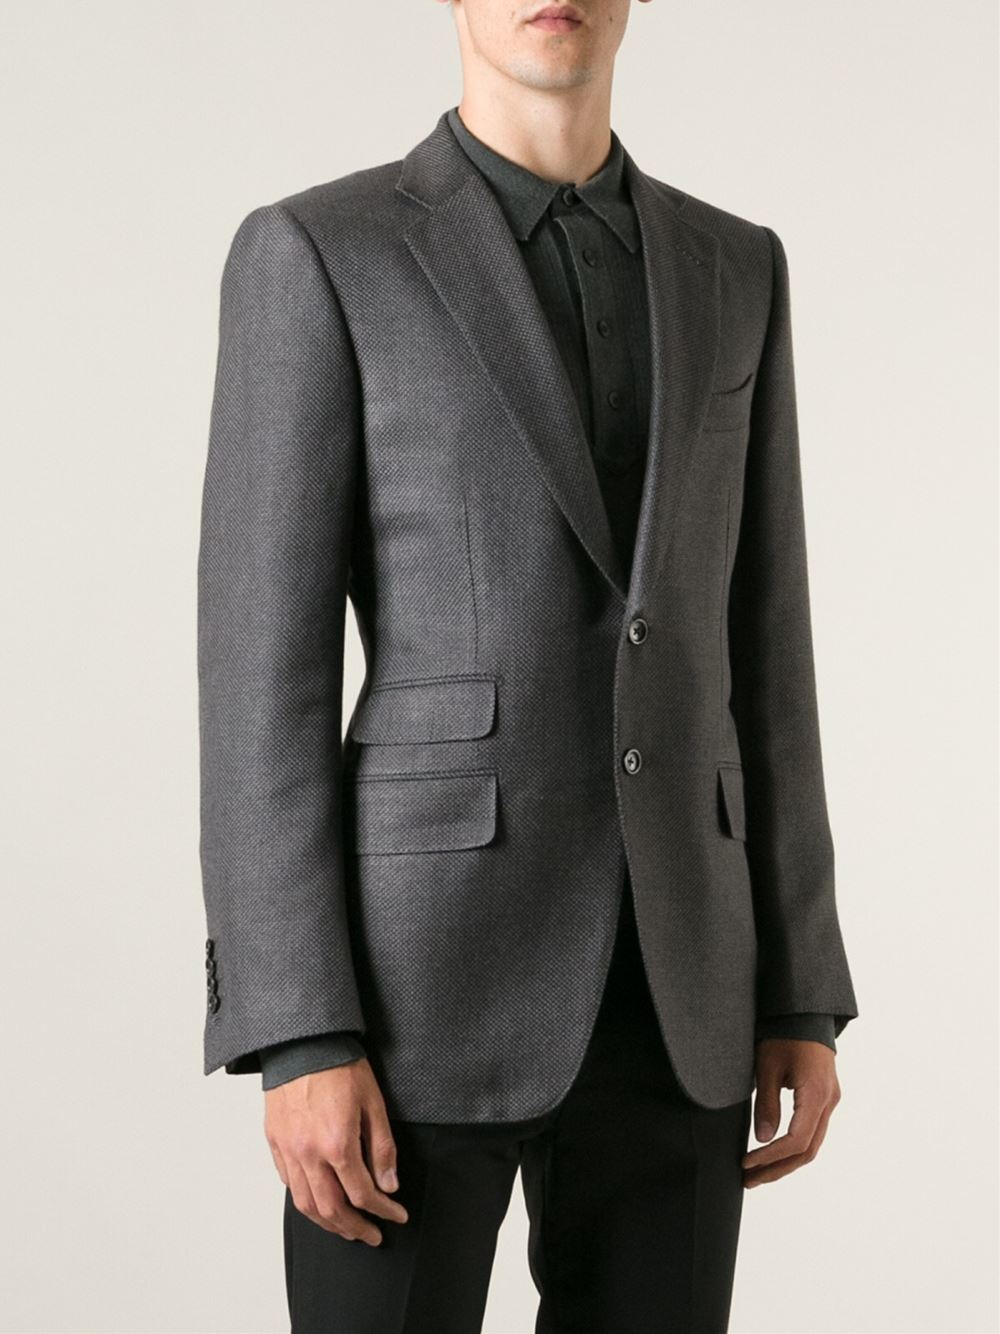 Tom Ford Classic Two-Button Blazer in Grey (Gray) for Men - Lyst